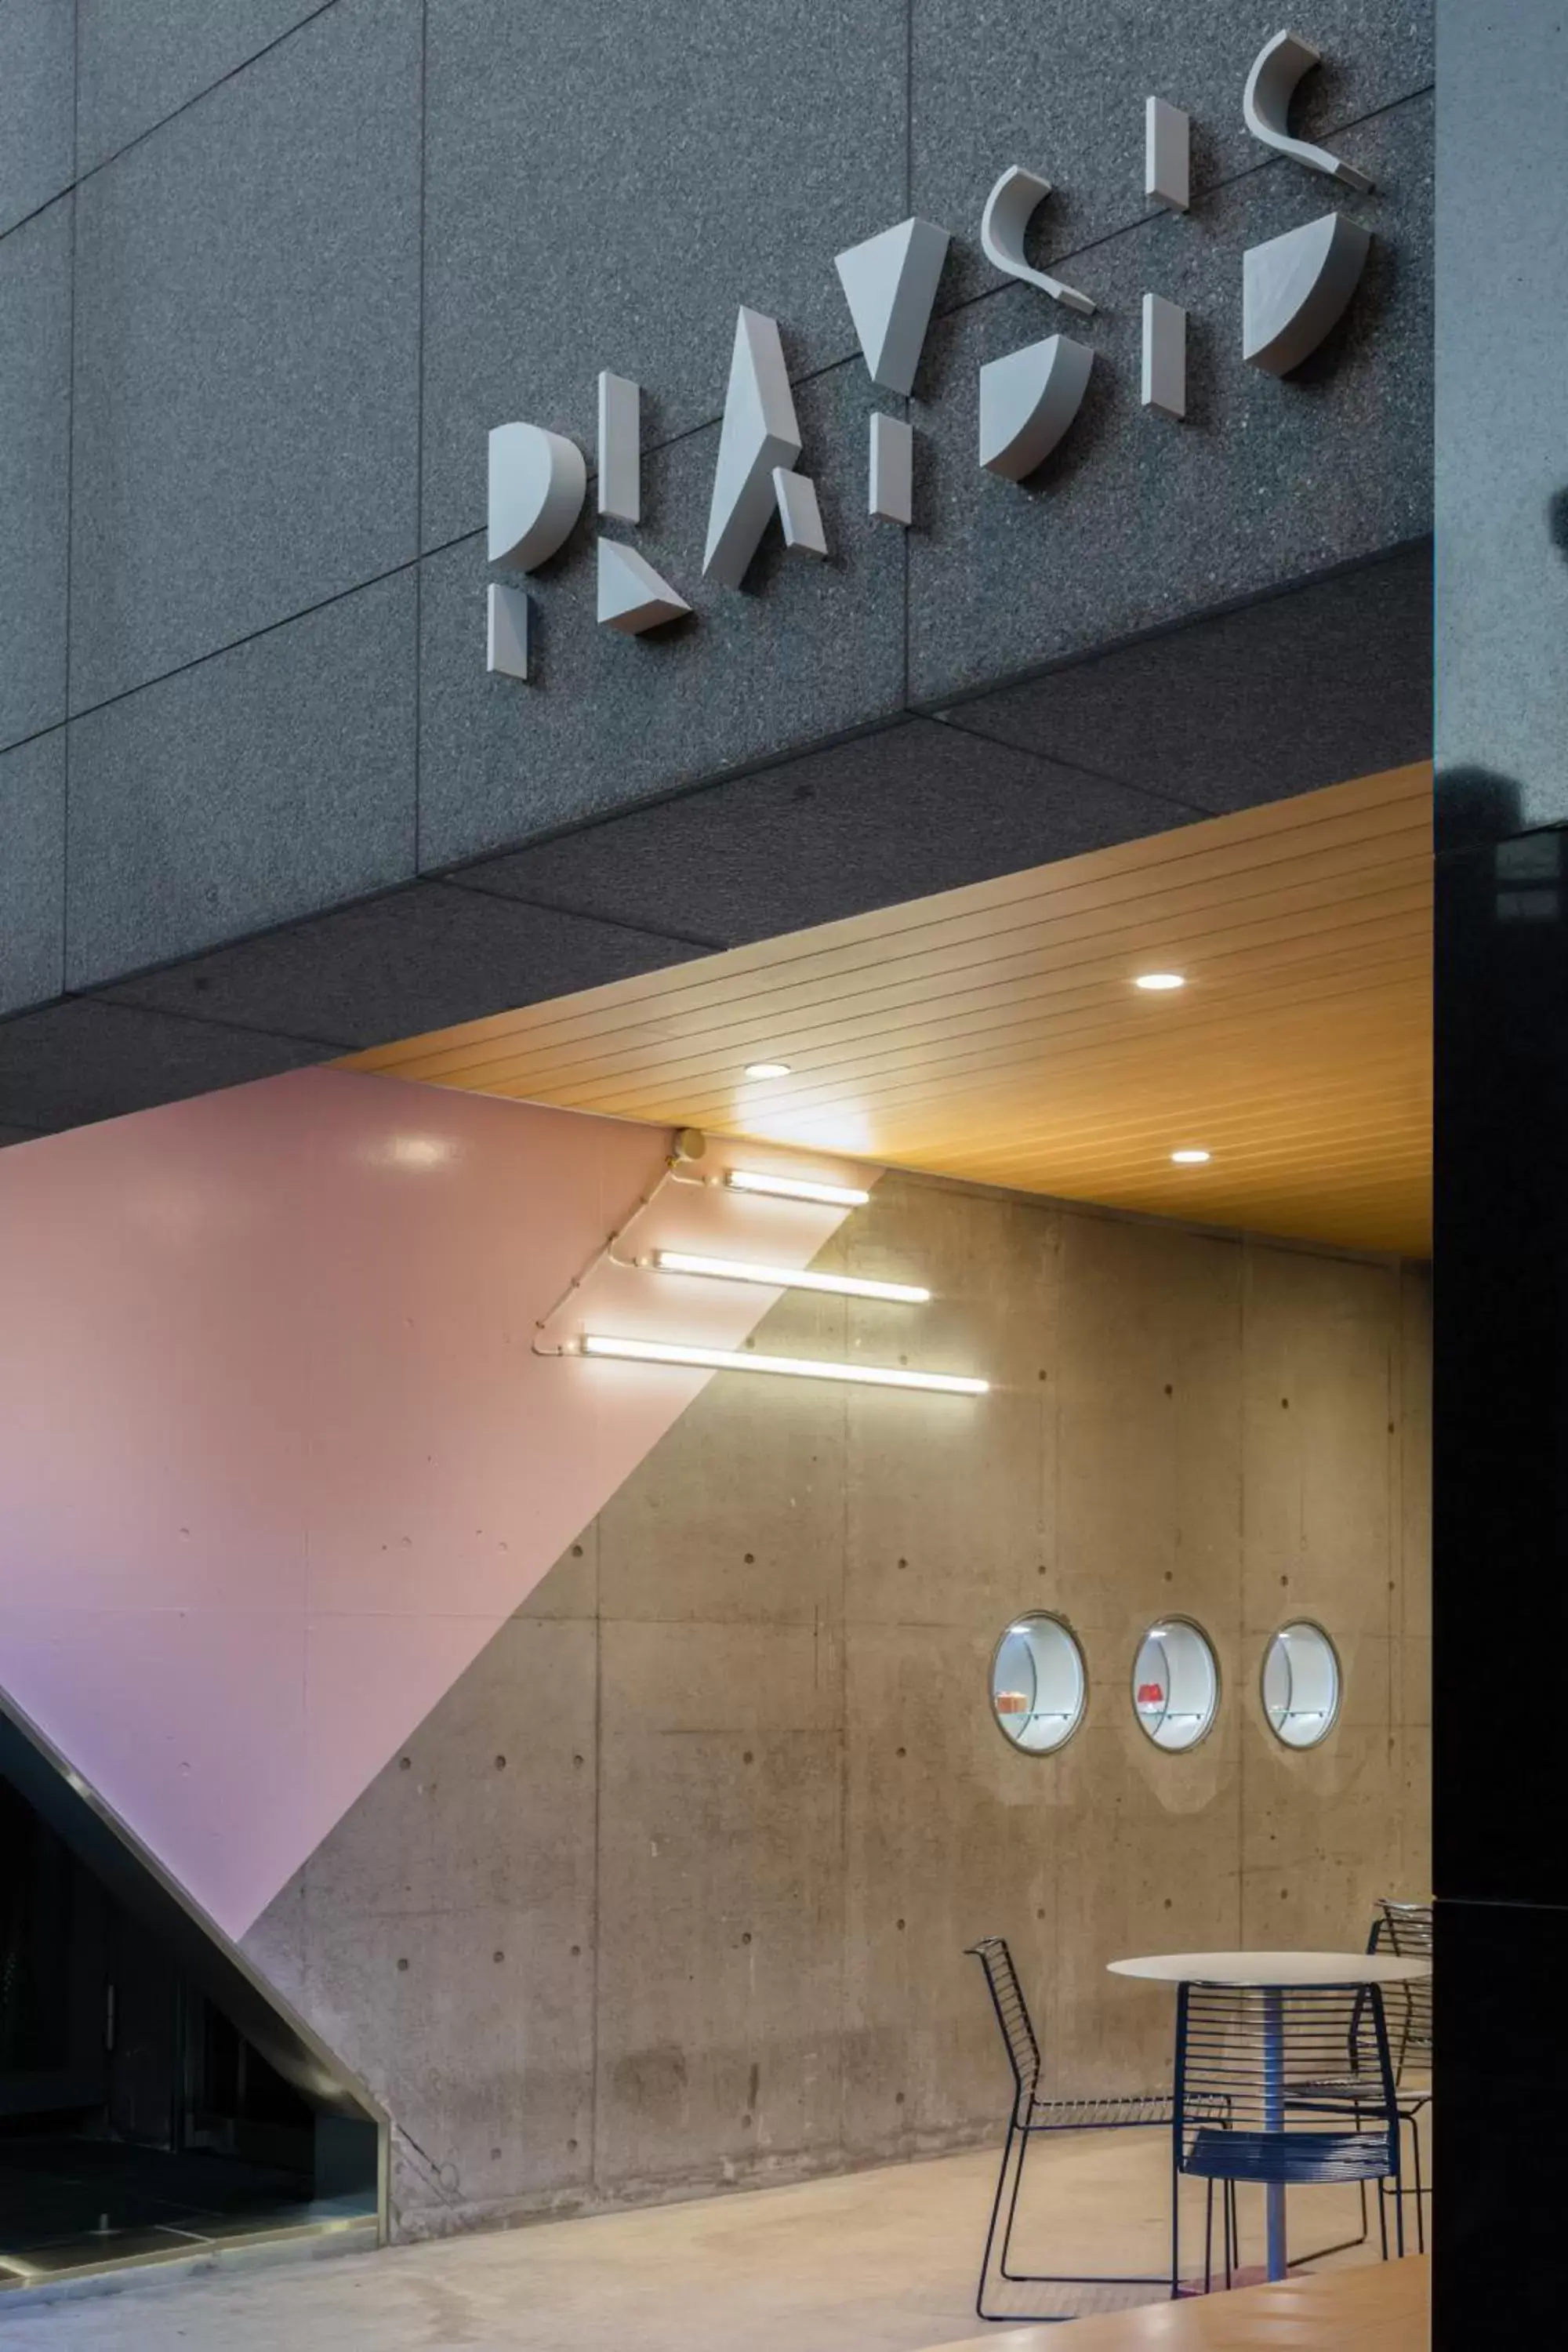 Property building in PLAYSIS East Tokyo